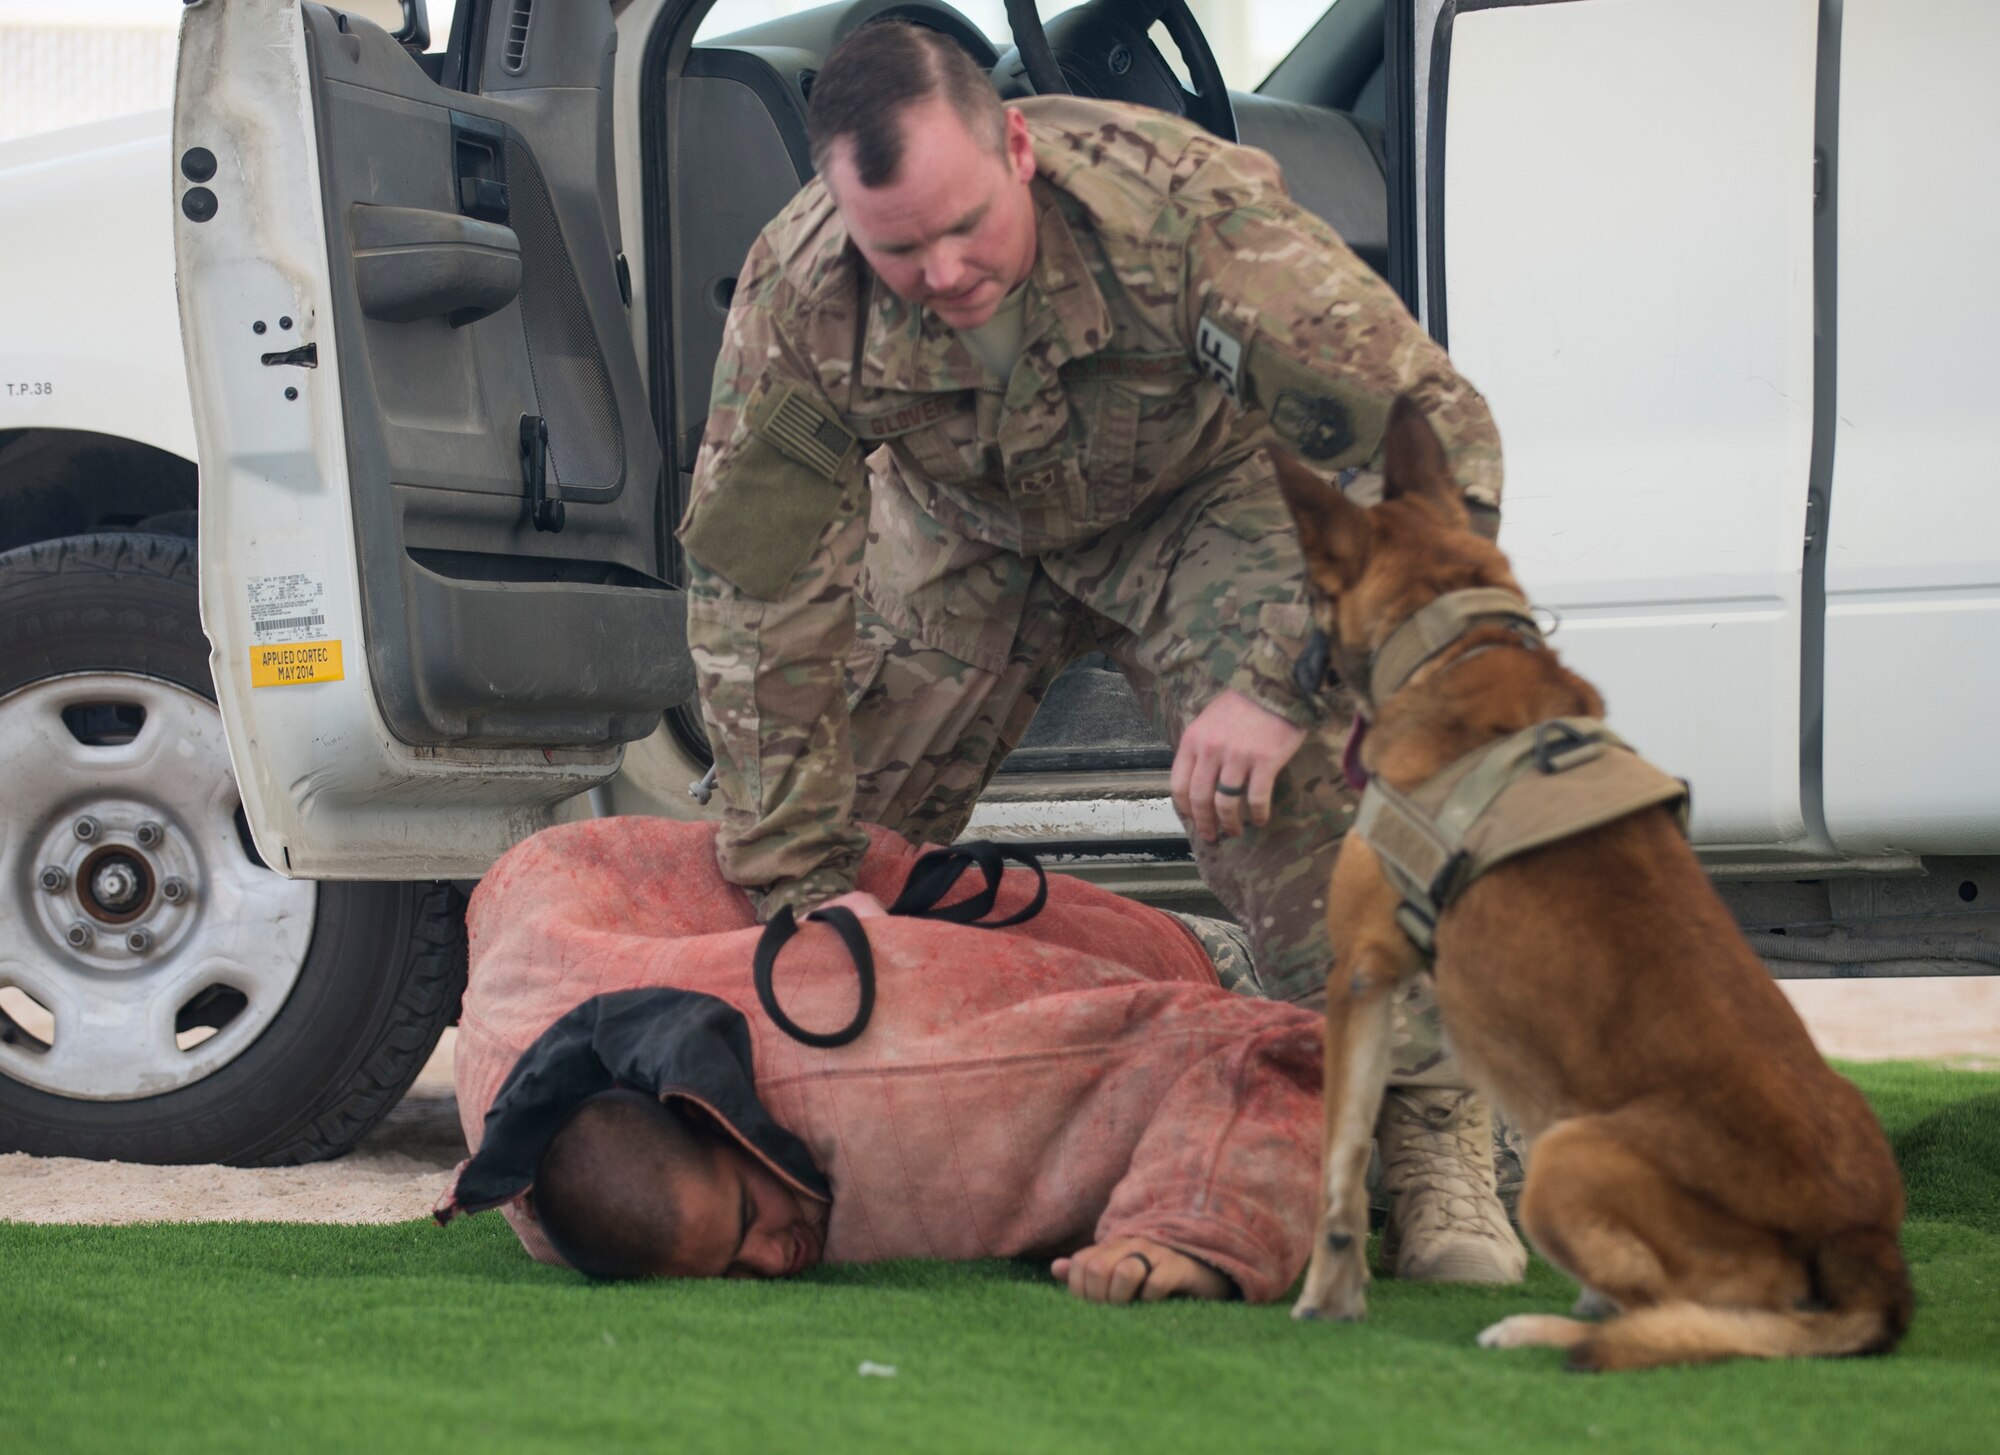 U.S. Air Force Staff Sgt. Timothy Glover, a military working dog handler with the 379th Expeditionary Security Forces Squadron, apprehends a role player after his military working dog Pprada completes a vehicle extraction demonstration at Al Udeid Air Base, Qatar, May 15, 2017. Airmen from the 379th ESFS organized a week of law enforcement activities to honor fallen civilian police officers, security forces airmen and U.S. Air Force Office of Special Investigations agents who died in the line of duty. (U.S. Air Force photo by Tech. Sgt. Amy M. Lovgren)